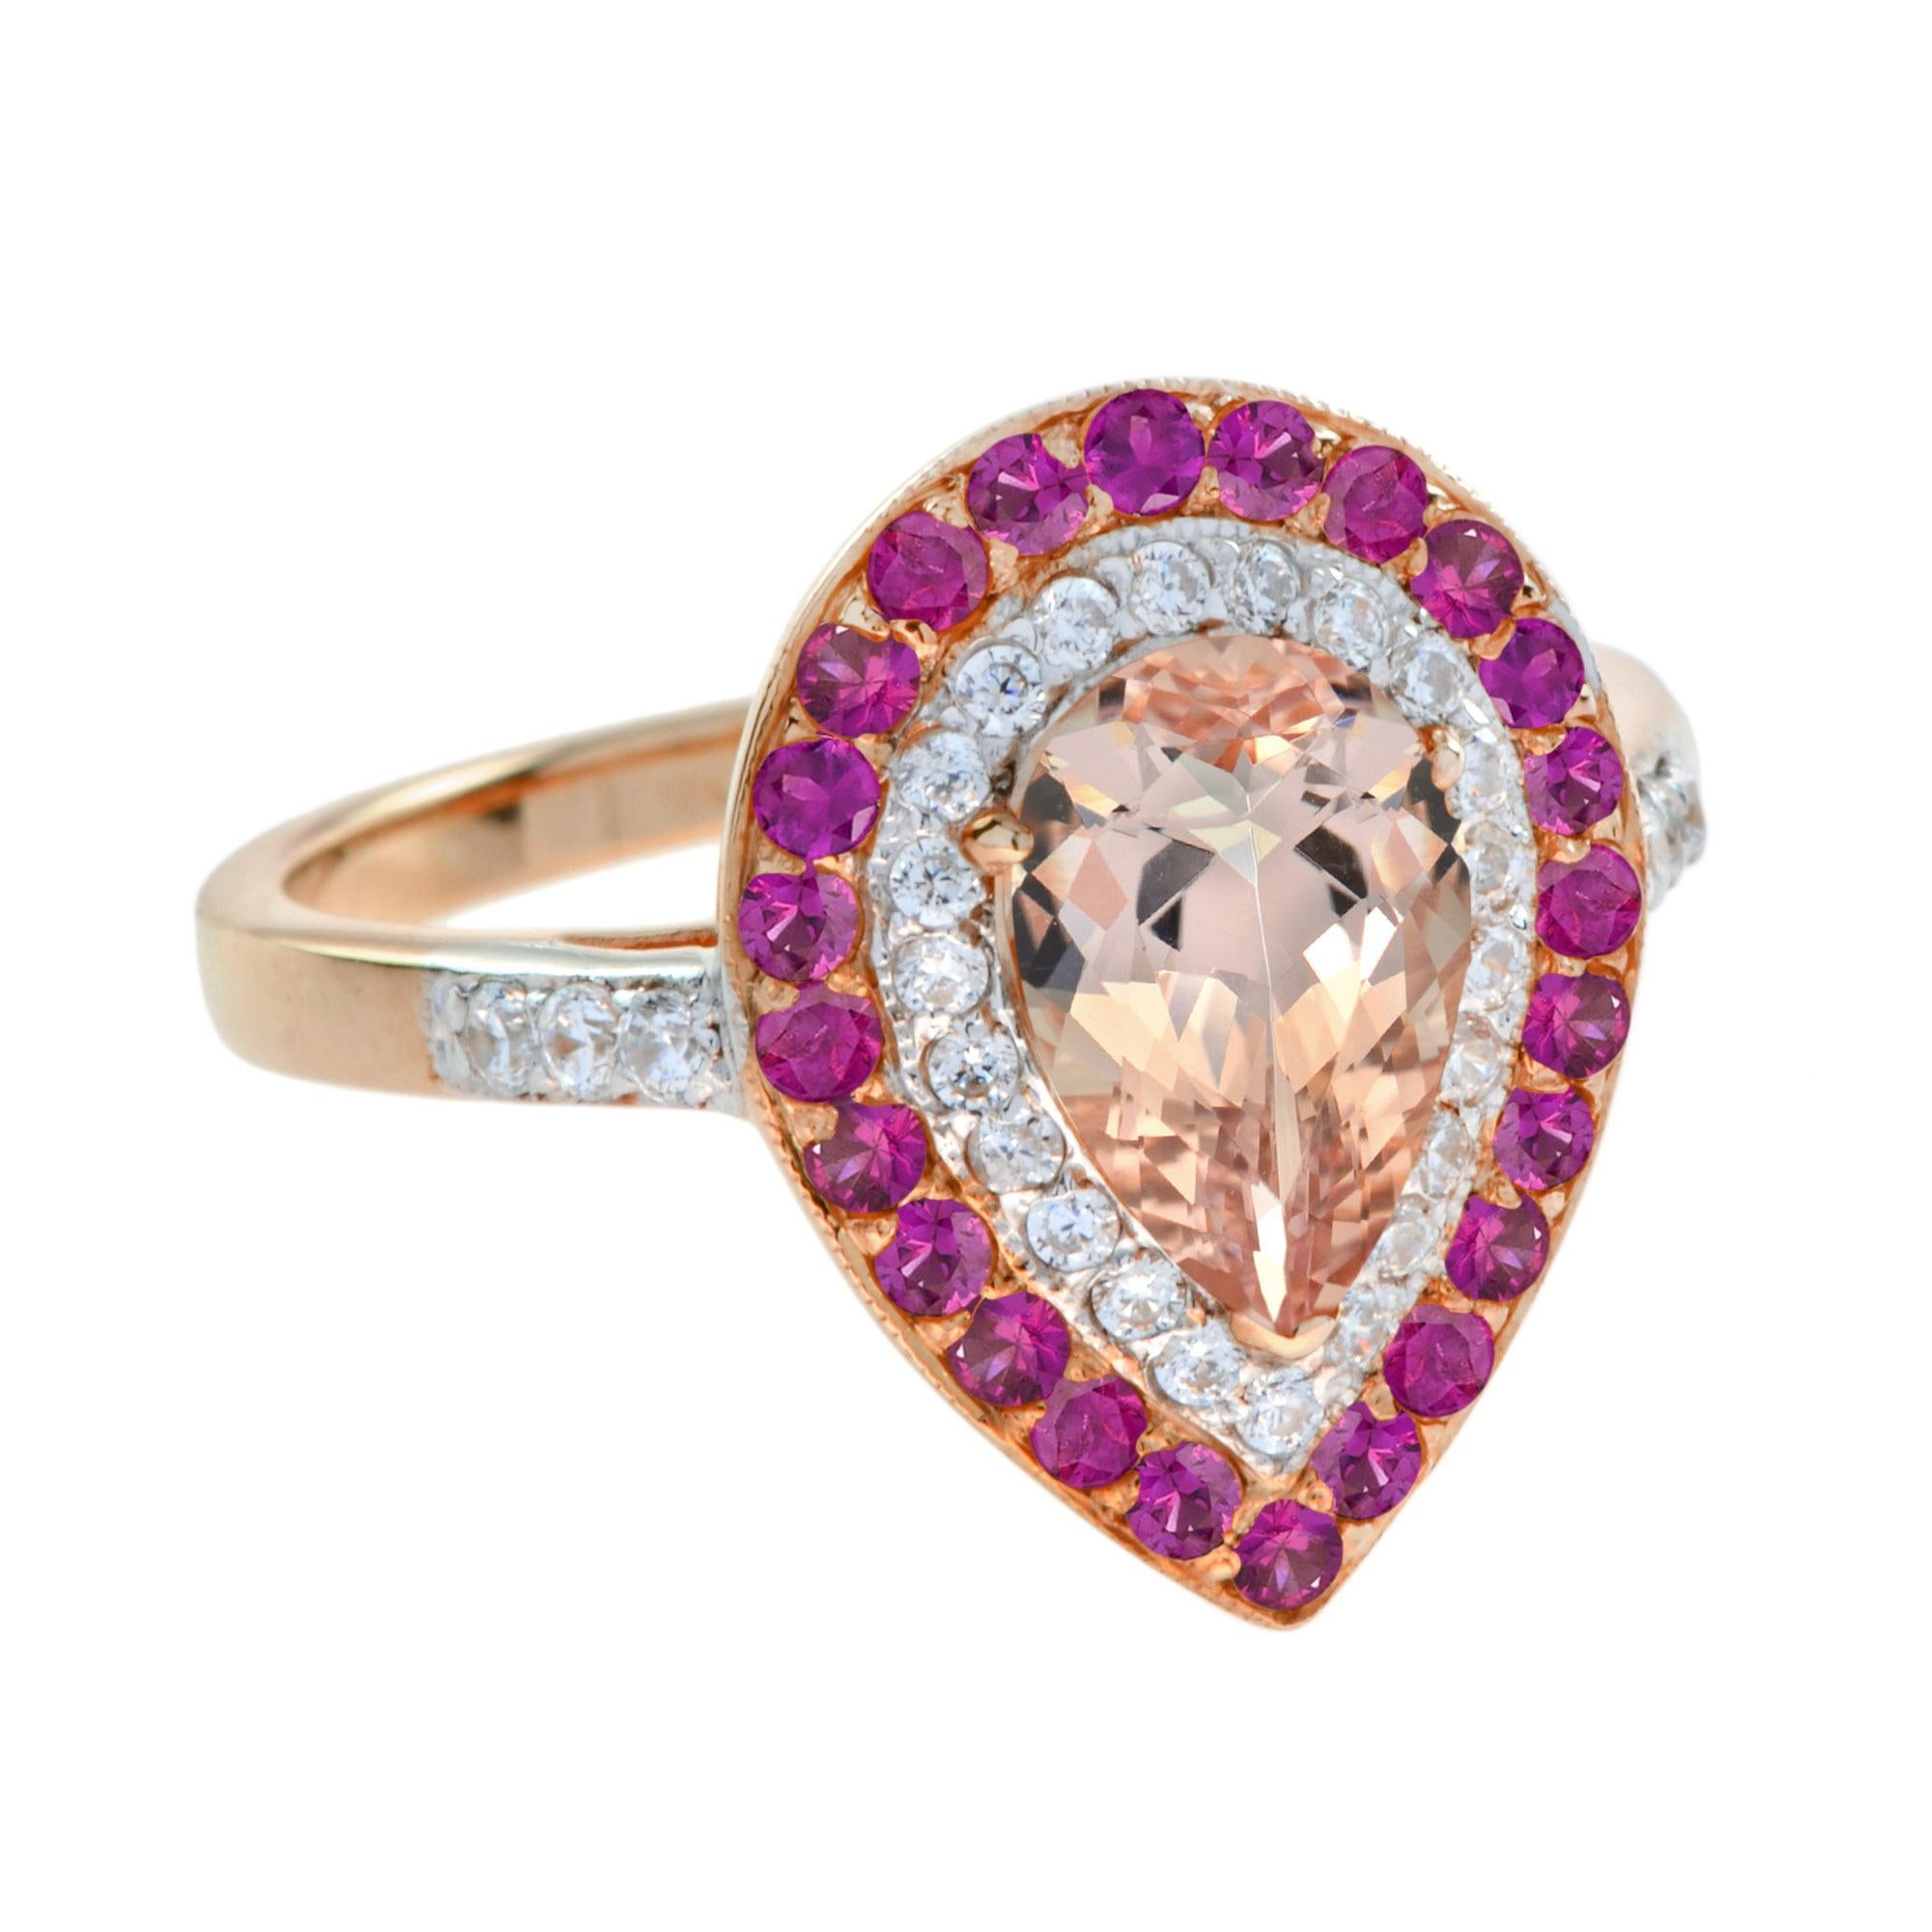 For Sale:  Morganite Diamond Ruby Pear Shaped Halo  Engagement Ring in 14K Rose Gold 3